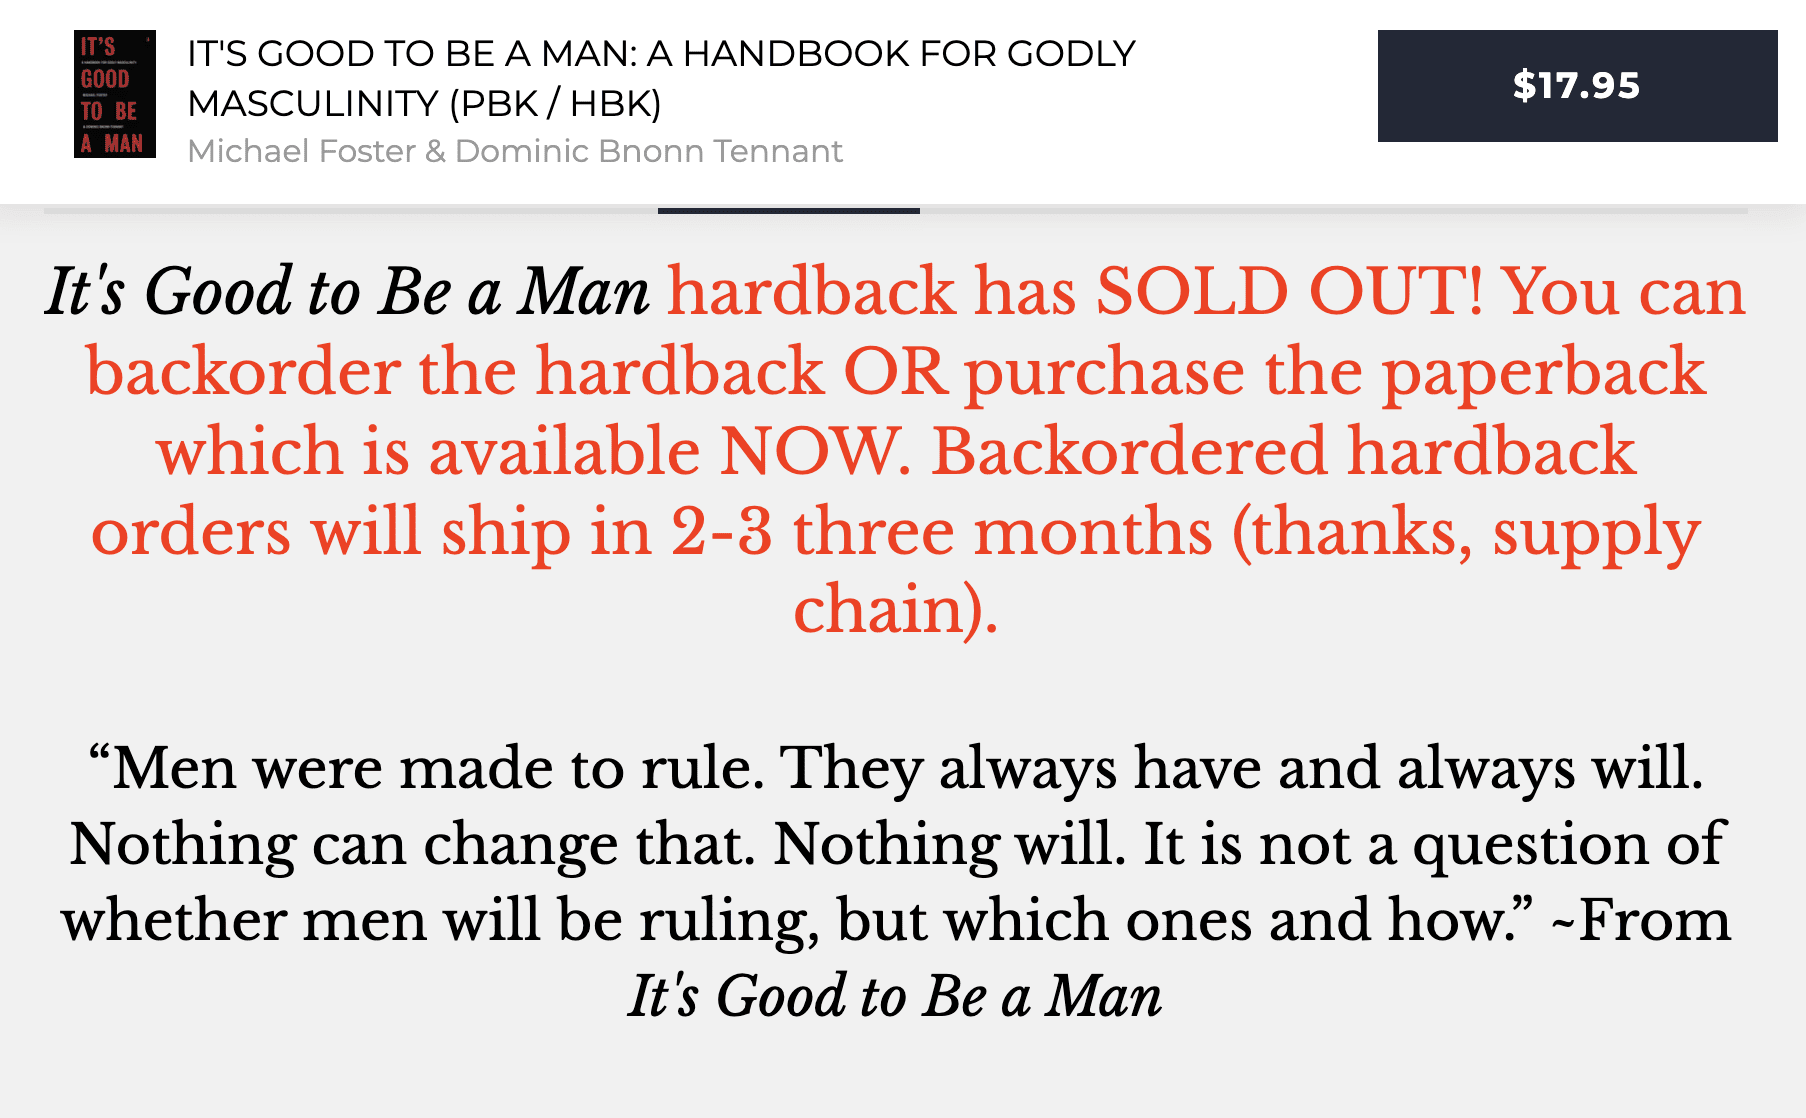 It’s Good To Be A Man is sold out in hardback until March, but you can get it in paperback now